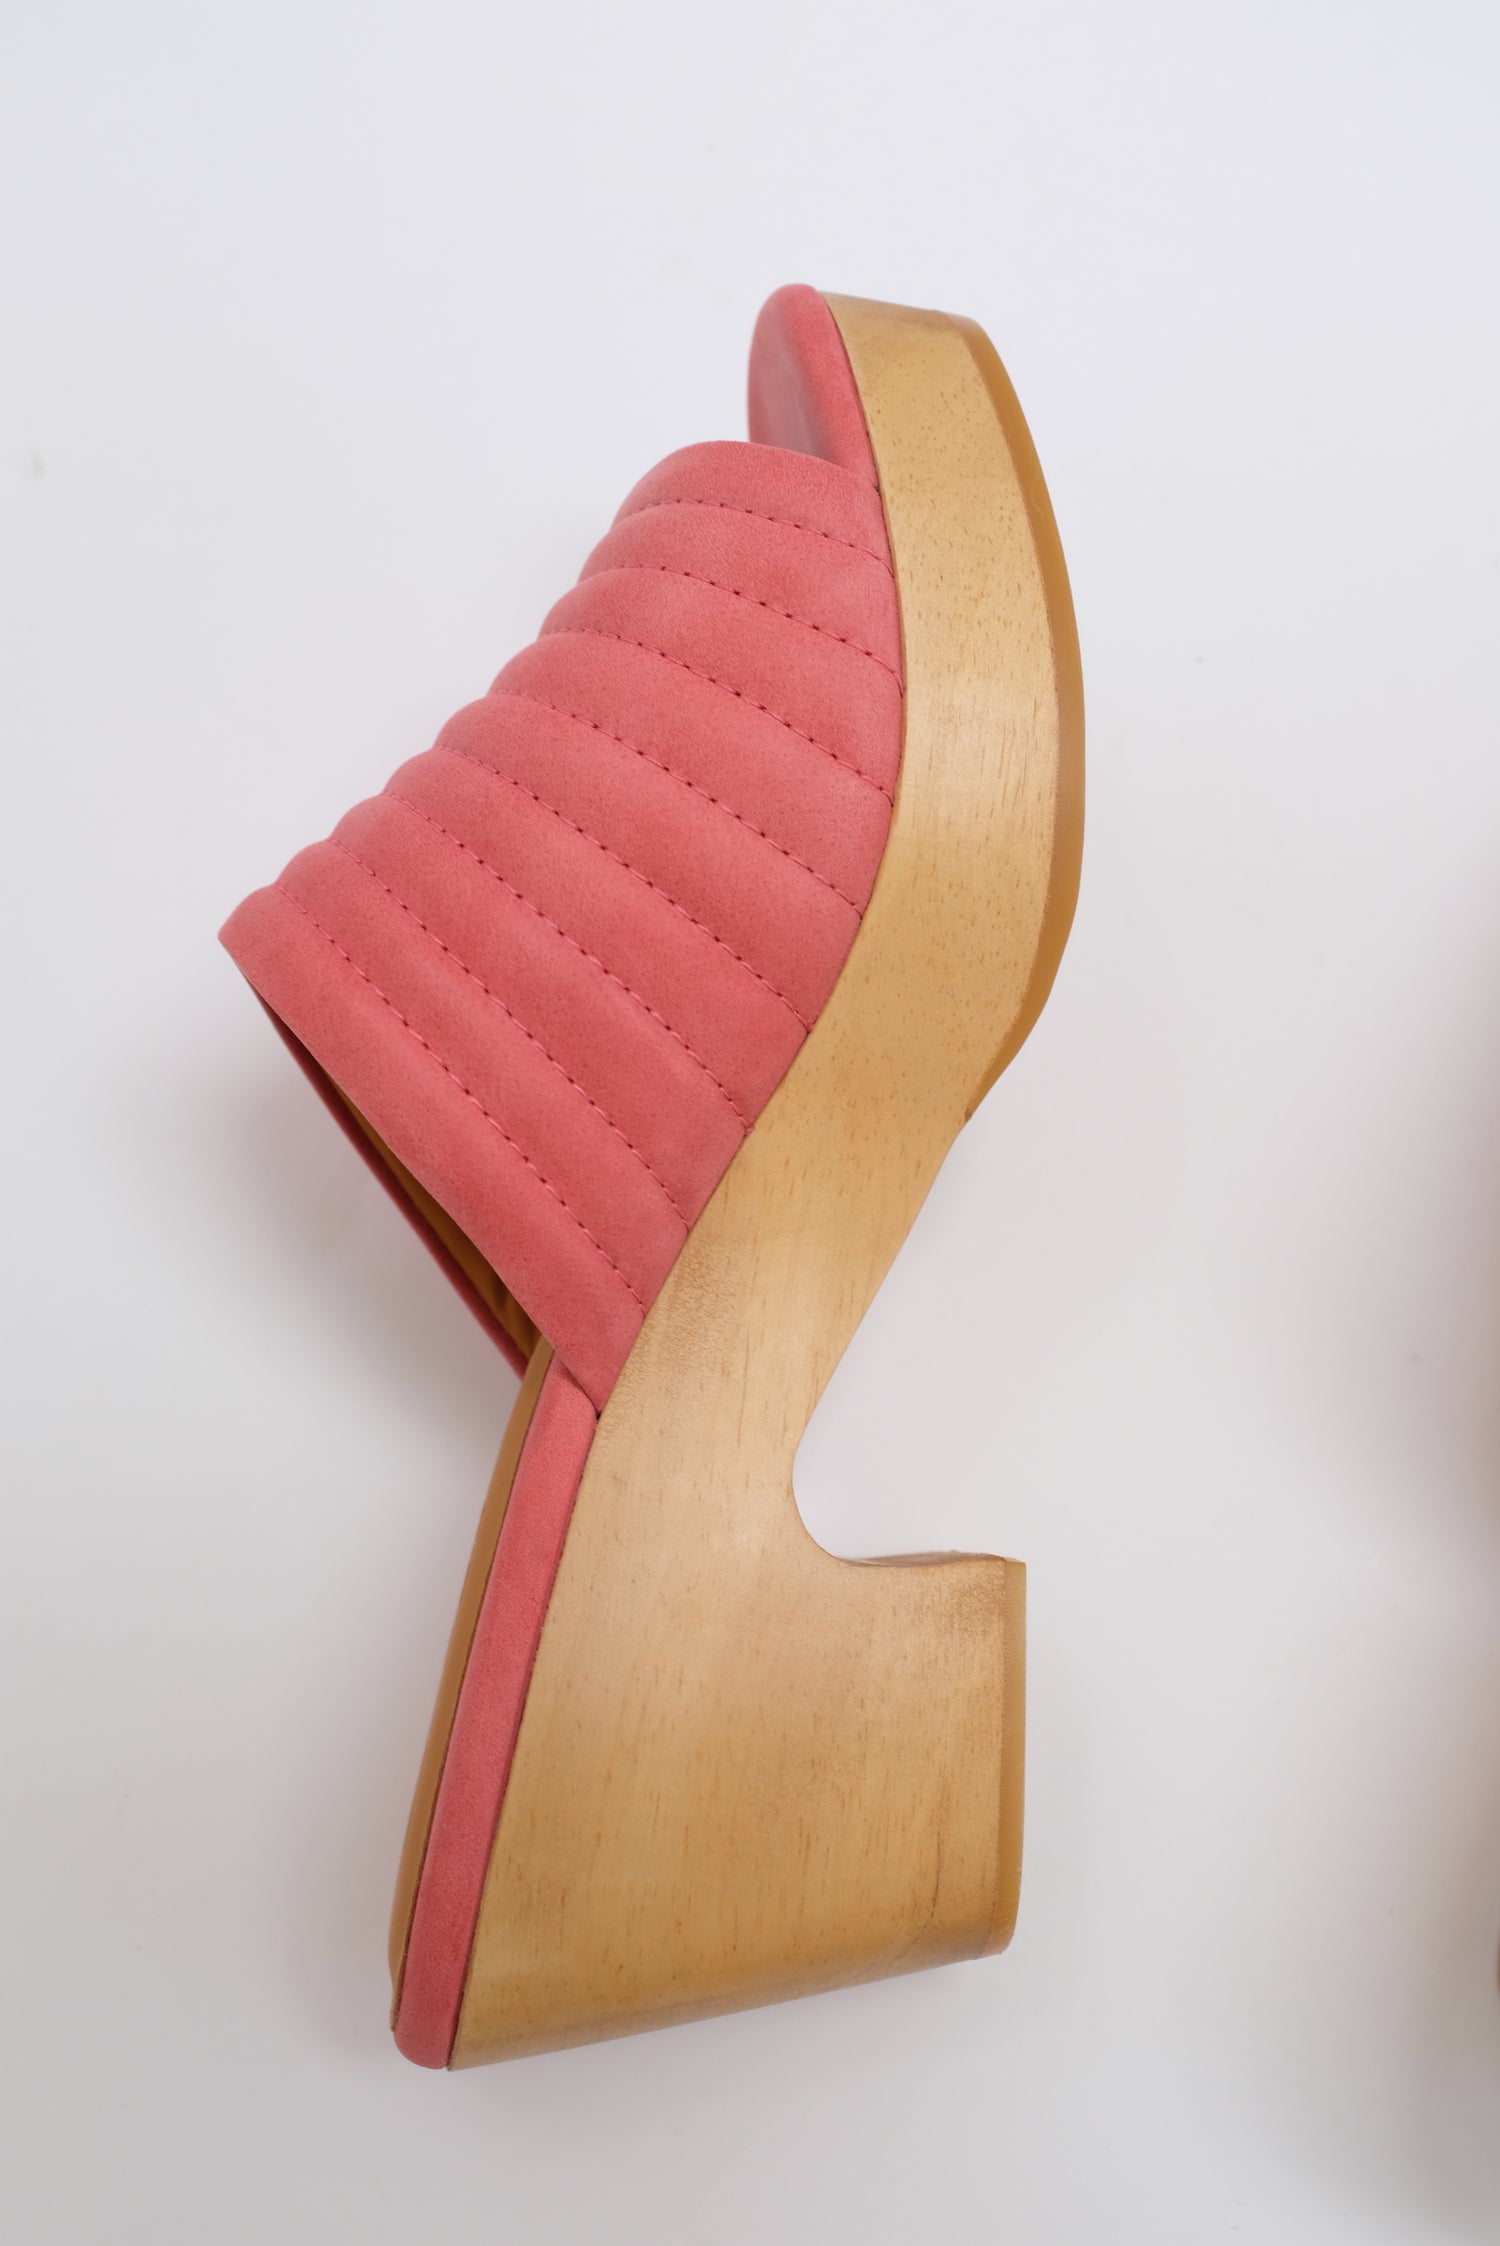 Beklina Ribbed Clog Open Toe Suede Roseate